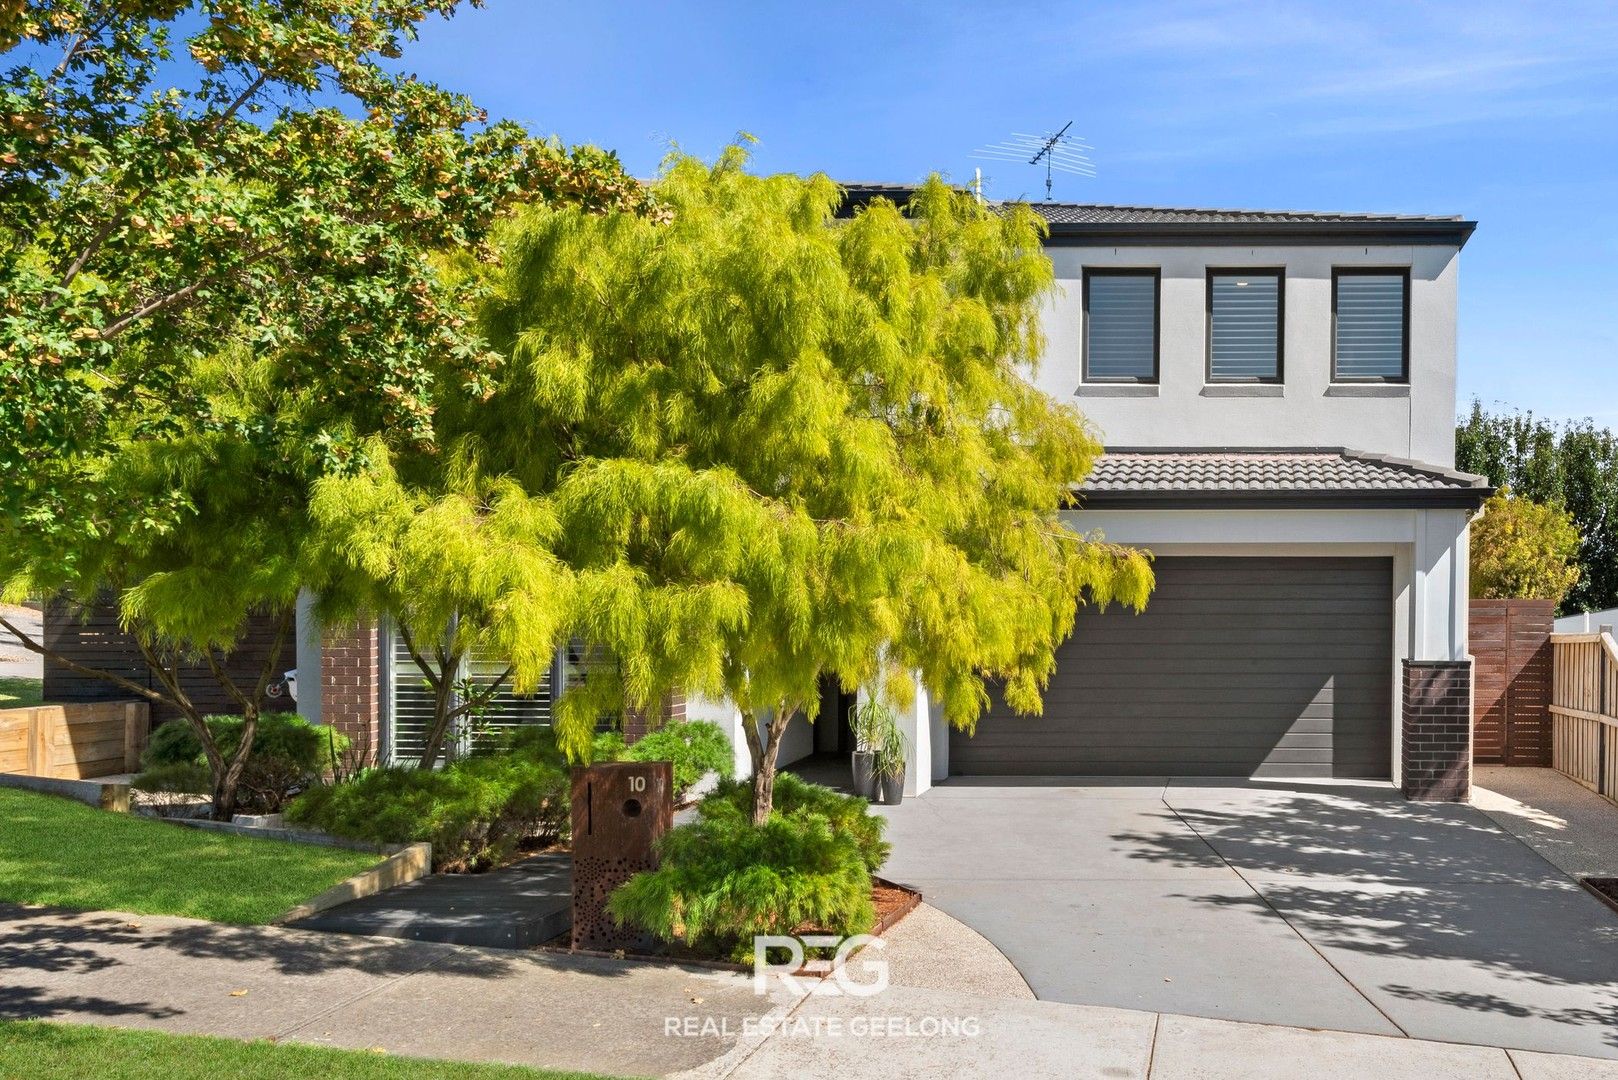 6 bedrooms House in 10 Montril Court HIGHTON VIC, 3216